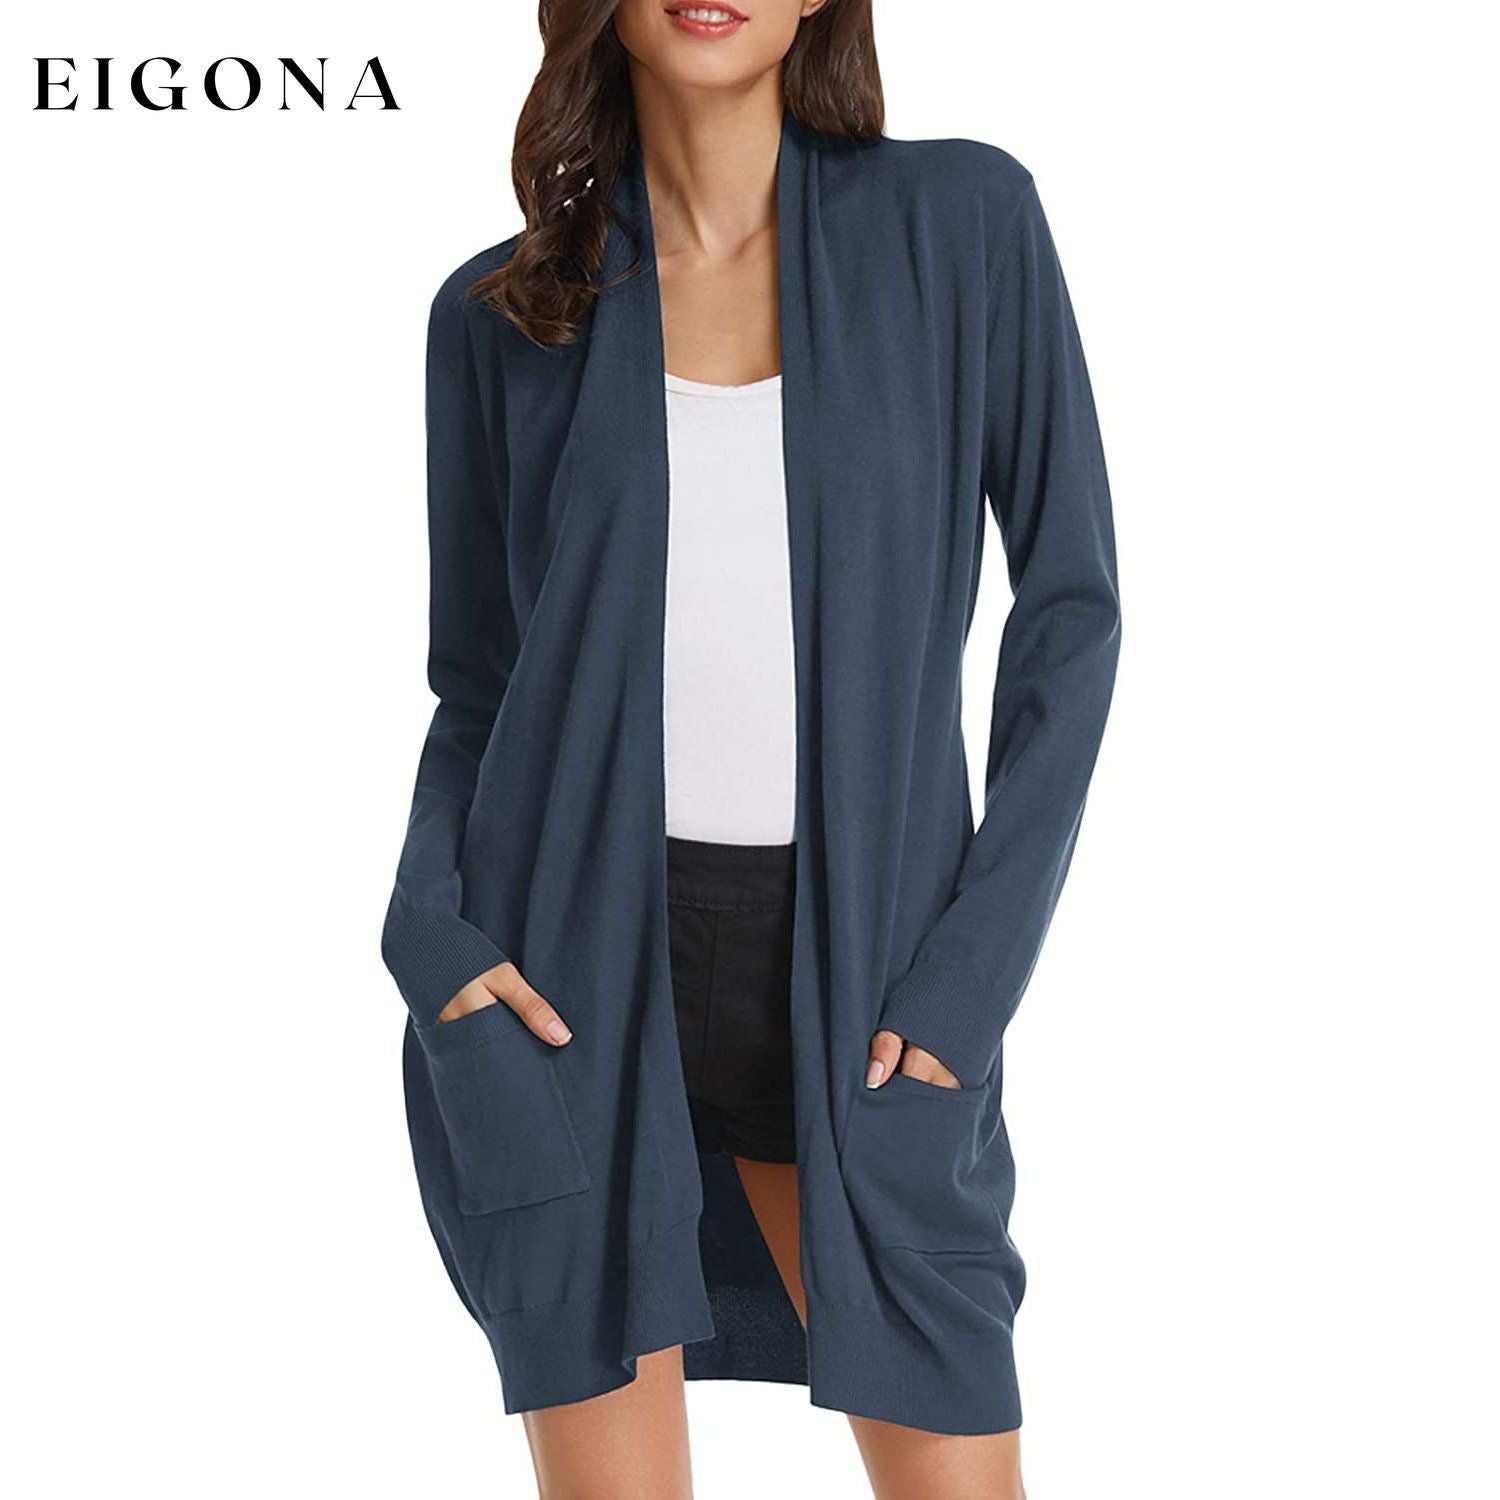 Women's Essential Solid Open Front Long Knited Cardigan Sweater Dark Blue __stock:500 Jackets & Coats refund_fee:1200